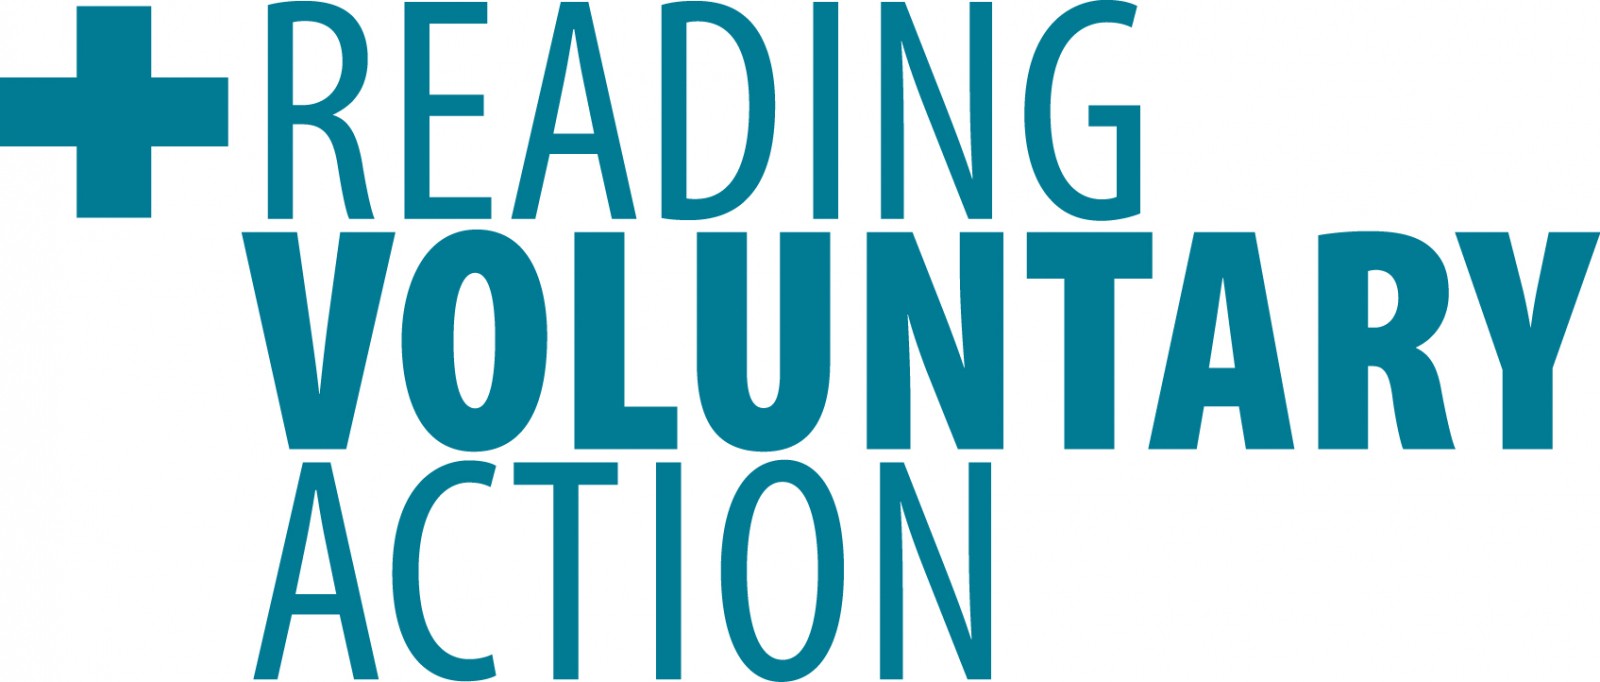 Reading Voluntary Action